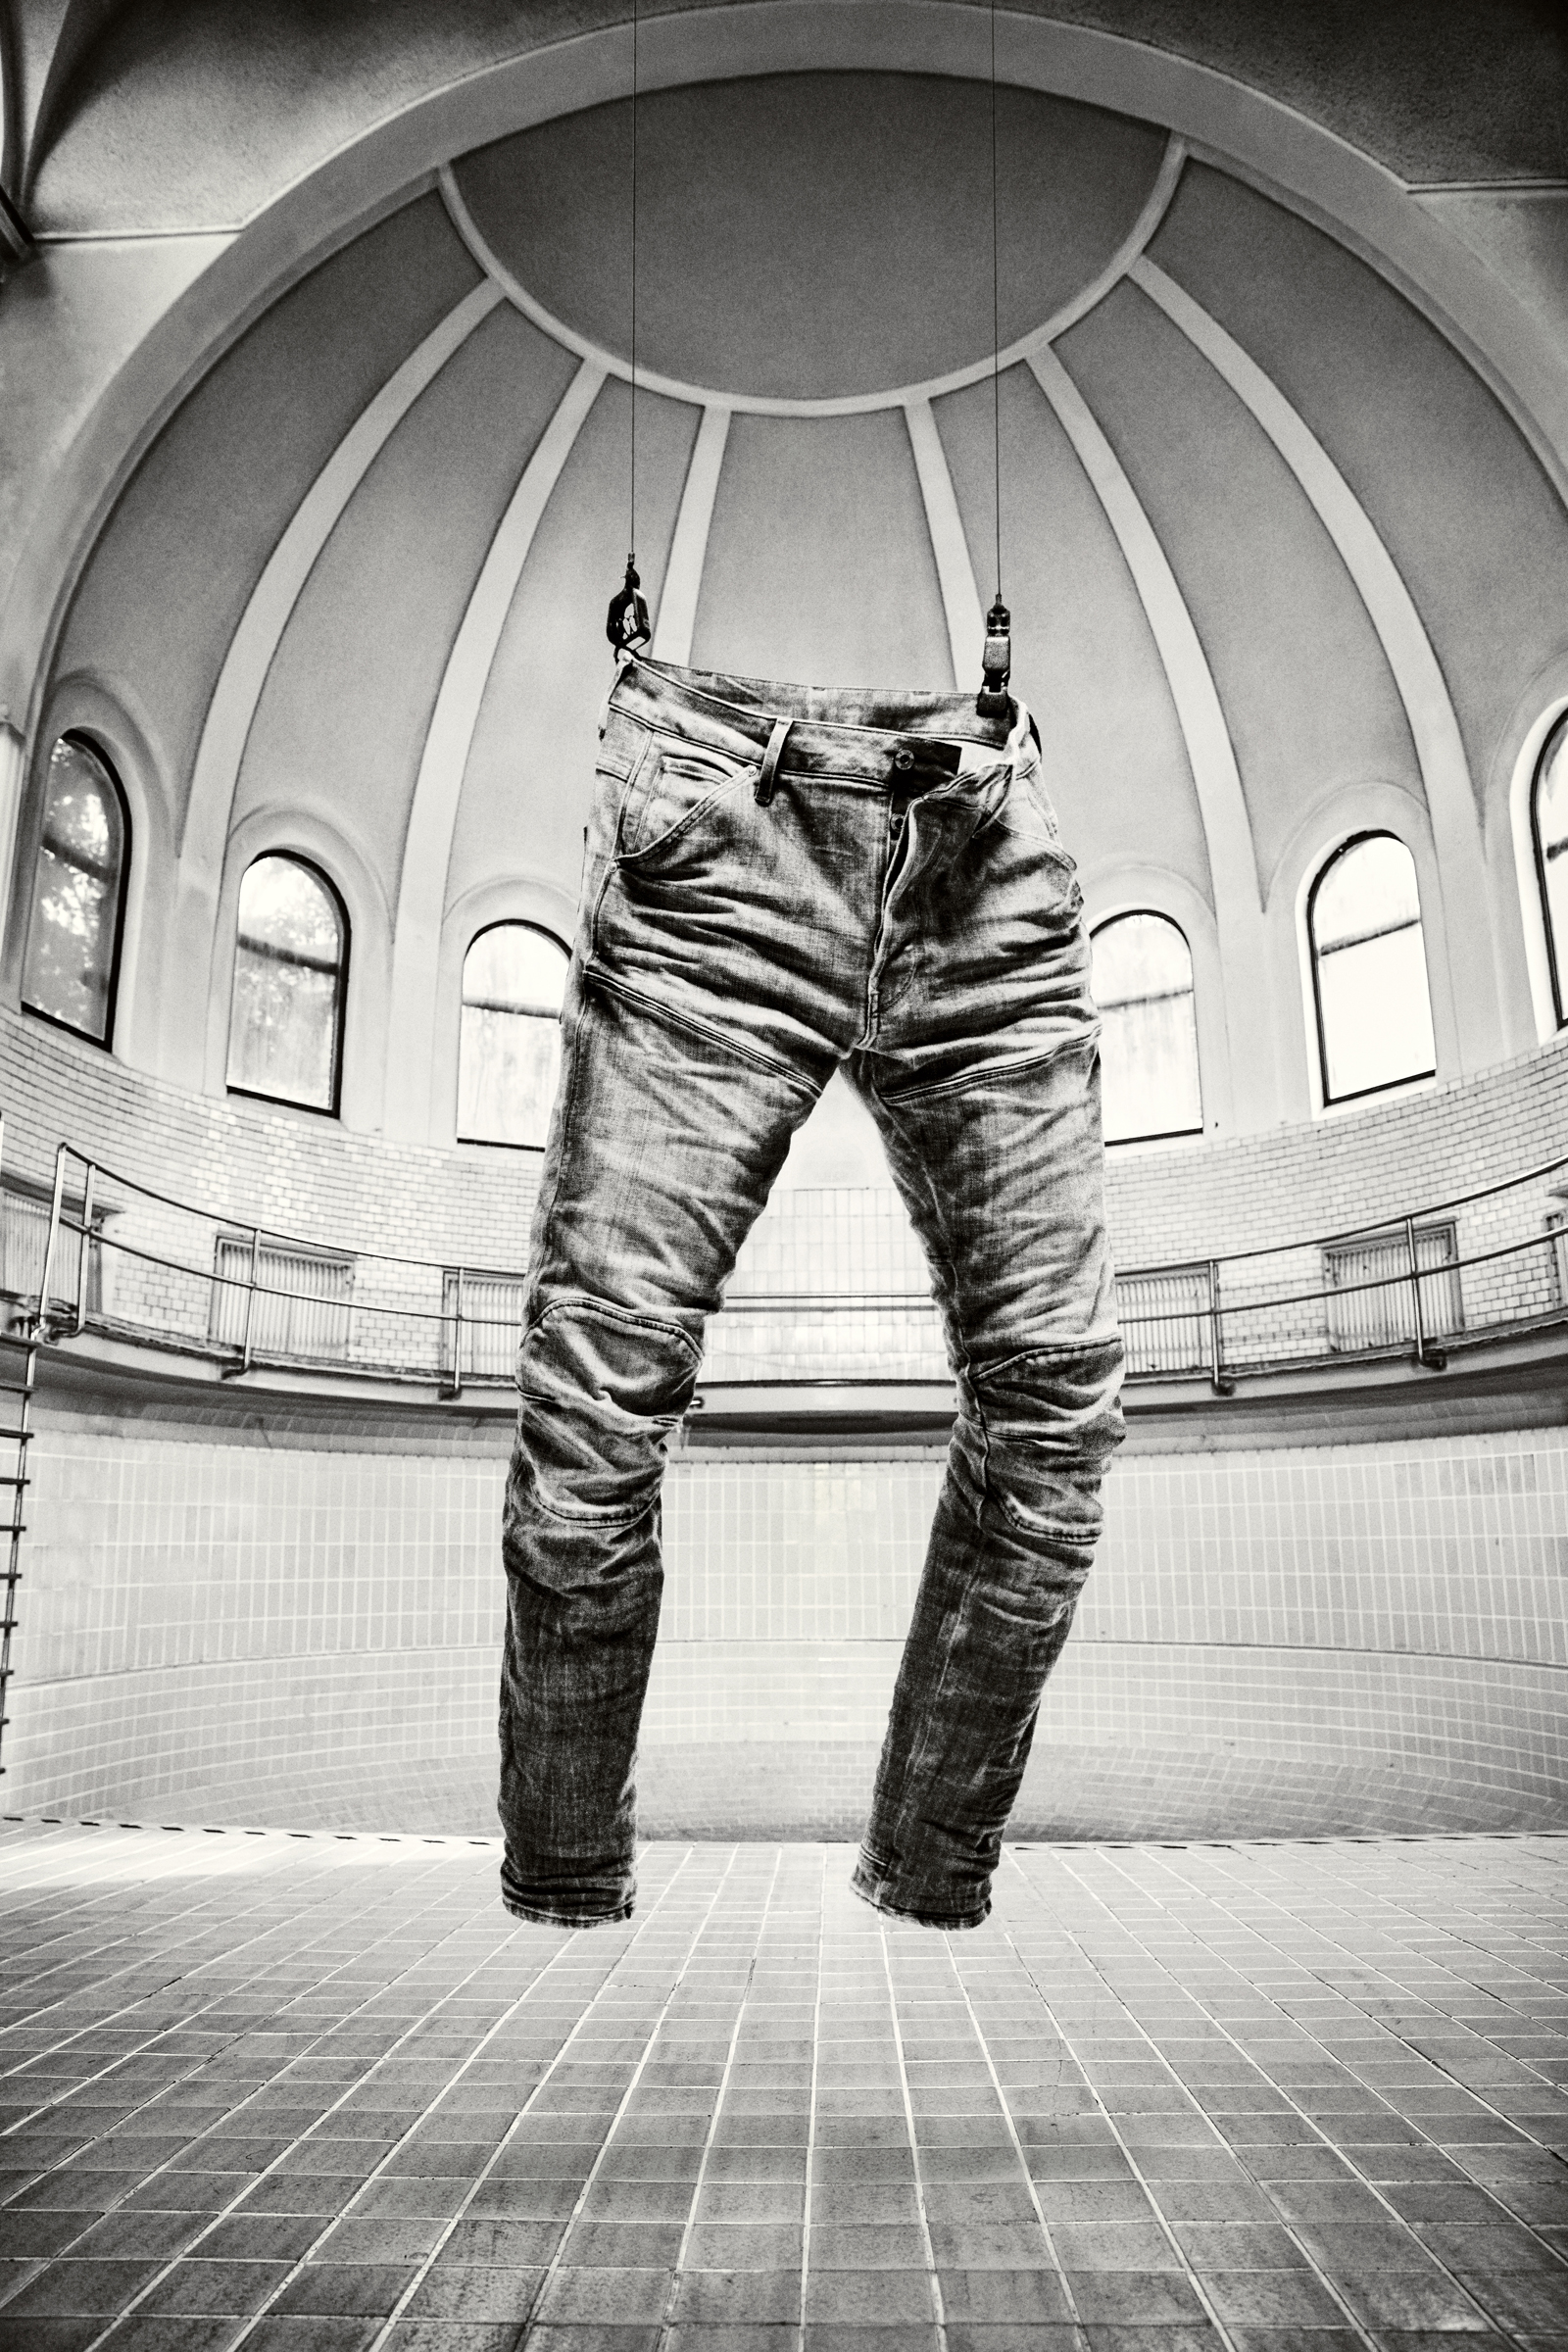 G-STAR CELEBRATES 20TH ANNIVERSARY OF THE ICONIC ELWOOD 5620 JEANS